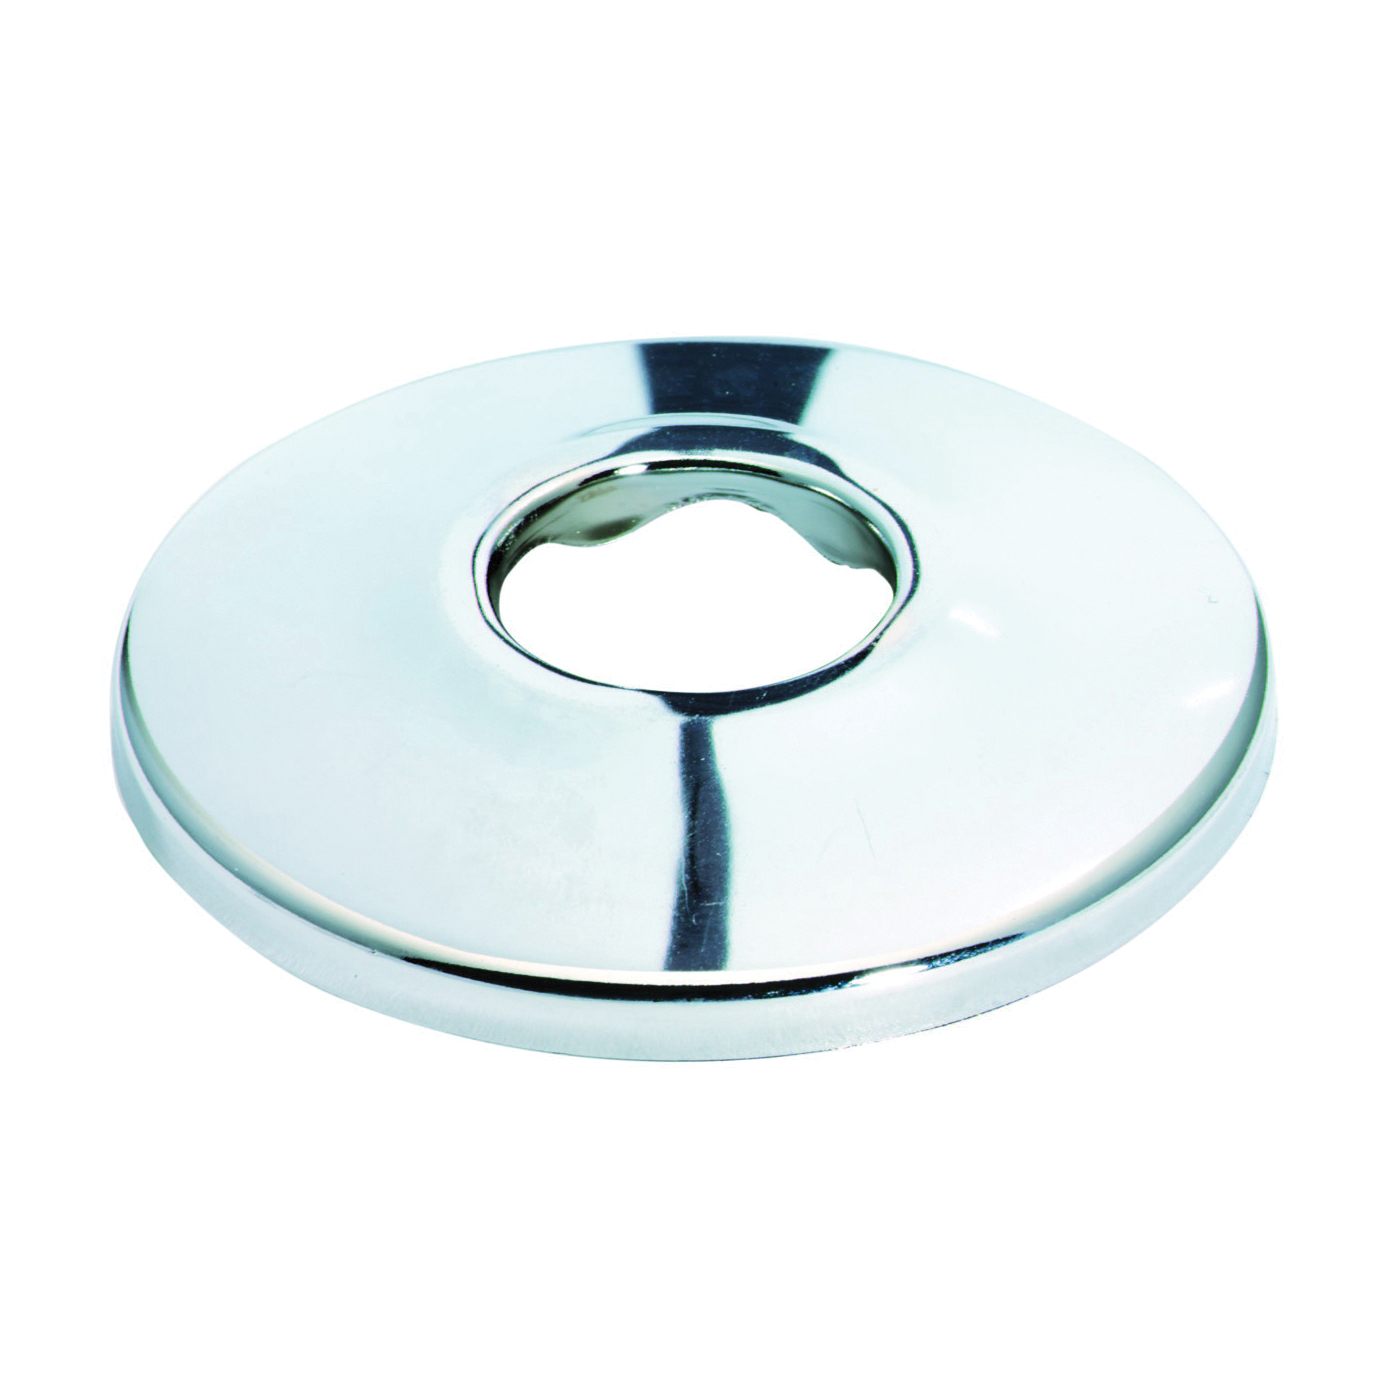 Plumb Pak PP20291 Bath Flange, 4 in OD, For: 1/2 in Pipes, Chrome